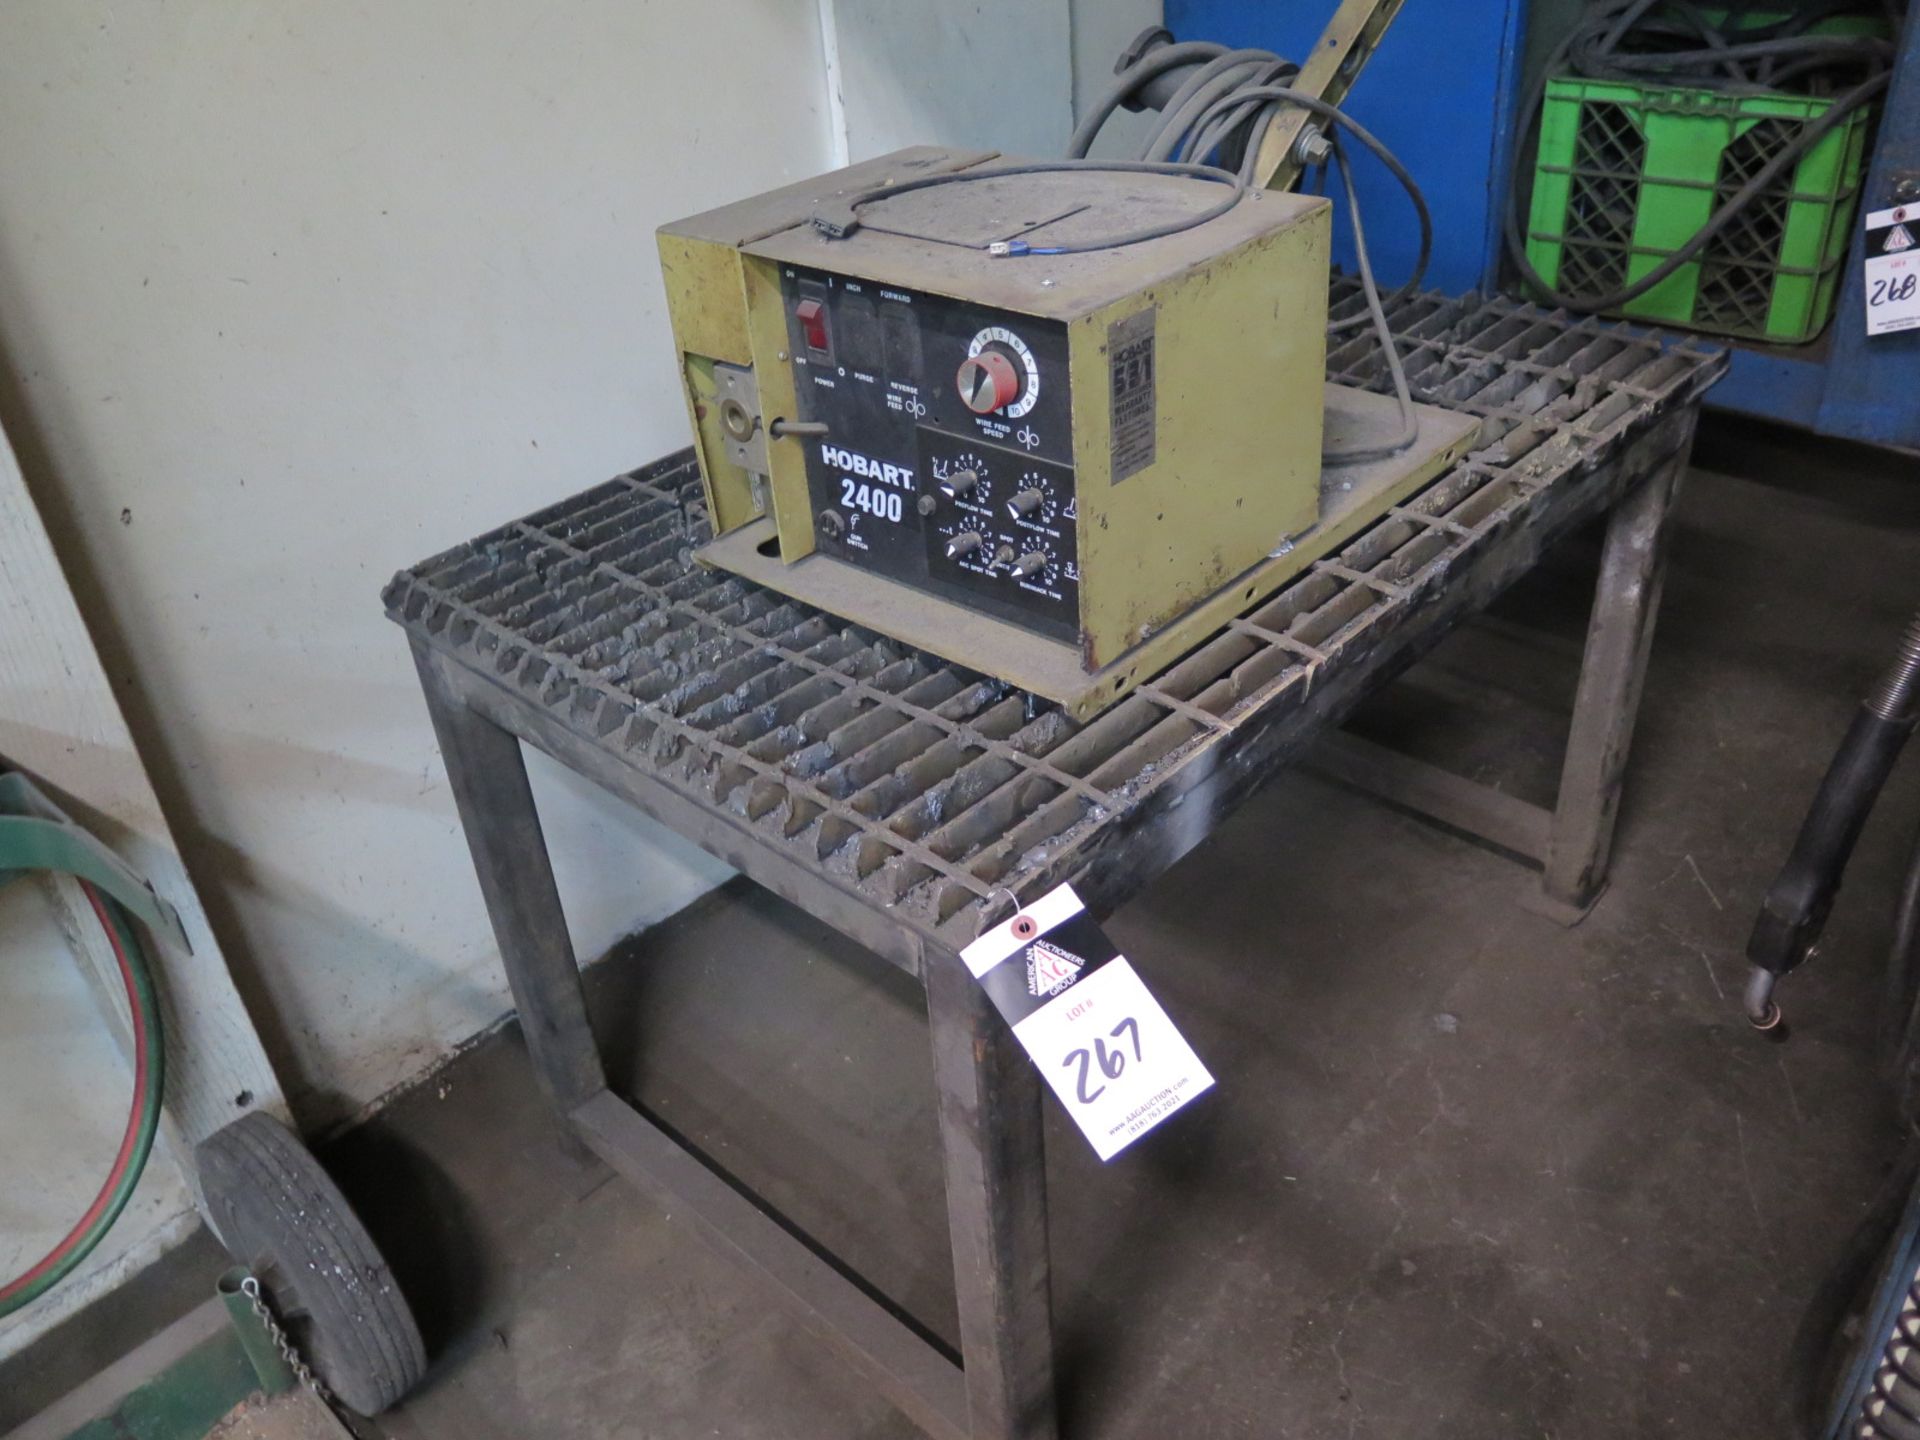 Torch Table and Hobart 2400 Wire Feeder